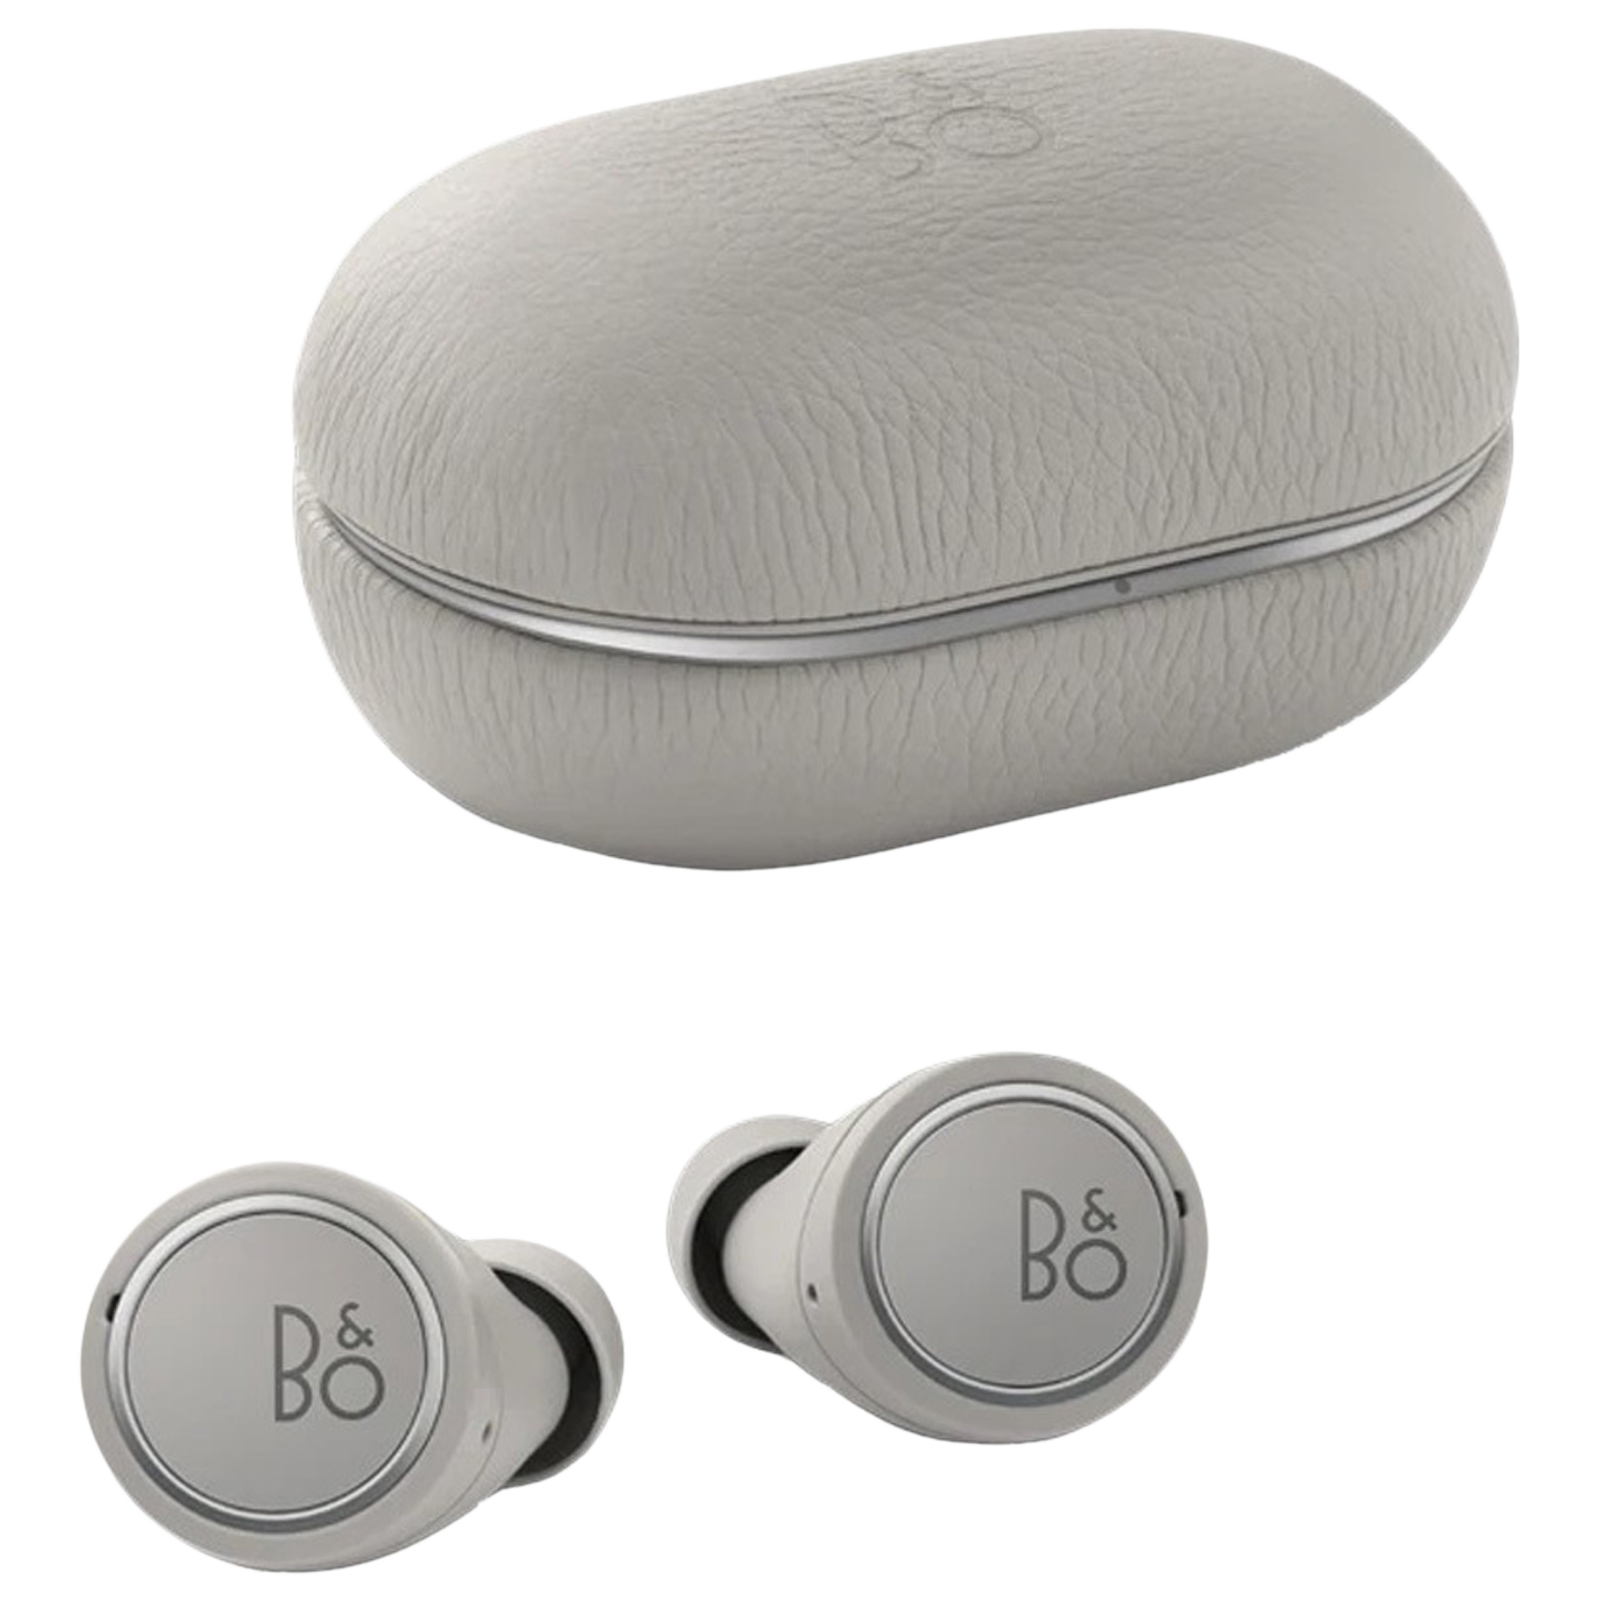 Bang & Olufsen Beoplay E8 3rd Generation BO-BPE8-GRY In-Ear Passive Noise Cancellation Truly Wireless Earbuds with Mic (Bluetooth 5.1, Fast Charging Capability, Grey Mist)_1